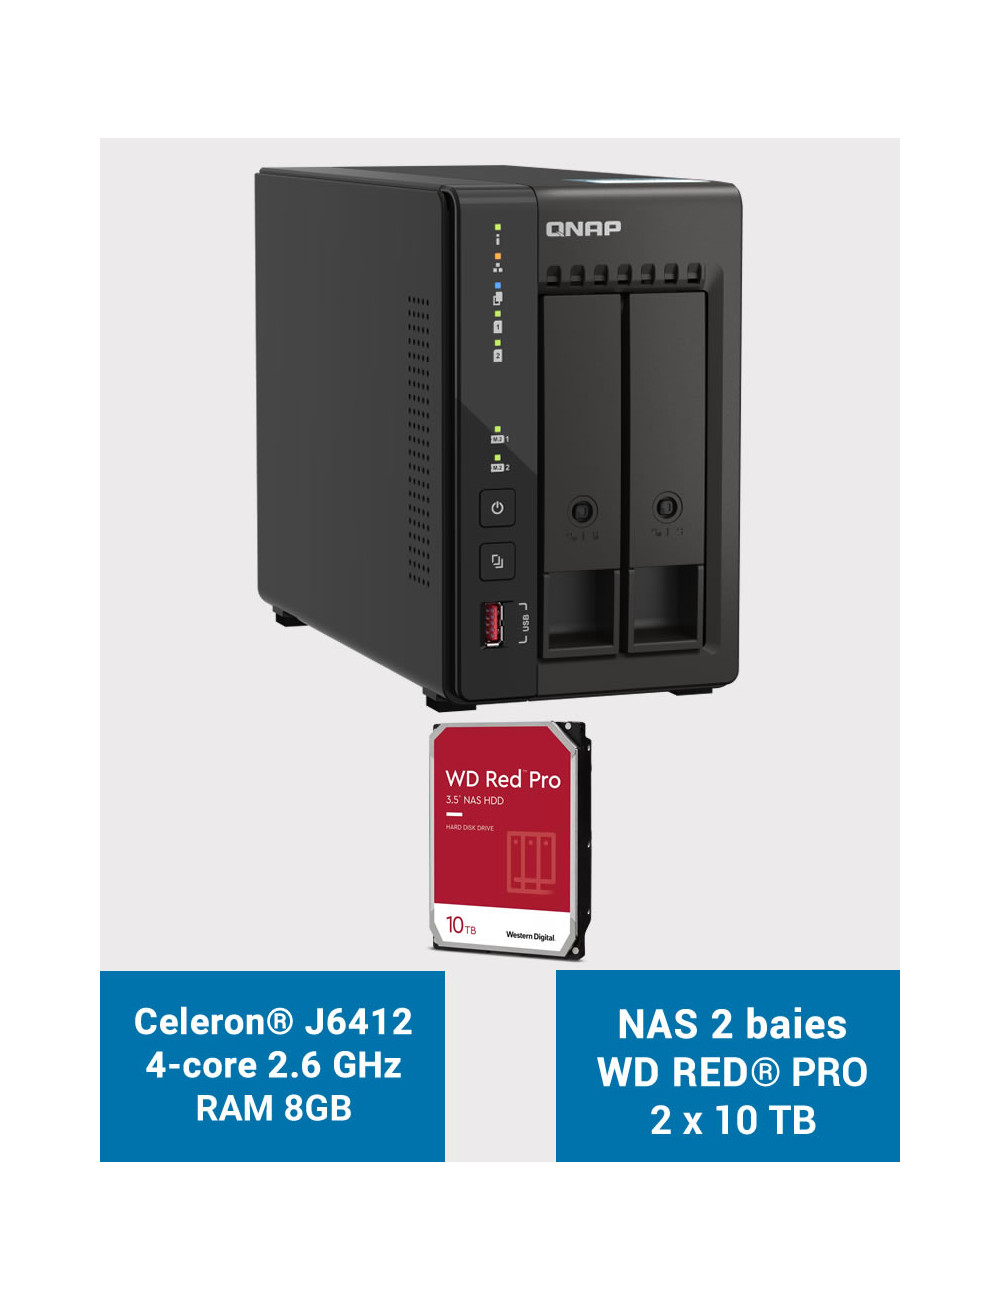 QNAP TS-253E 8GB Serveur NAS 2 baies WD RED PRO 20To (2x10To)